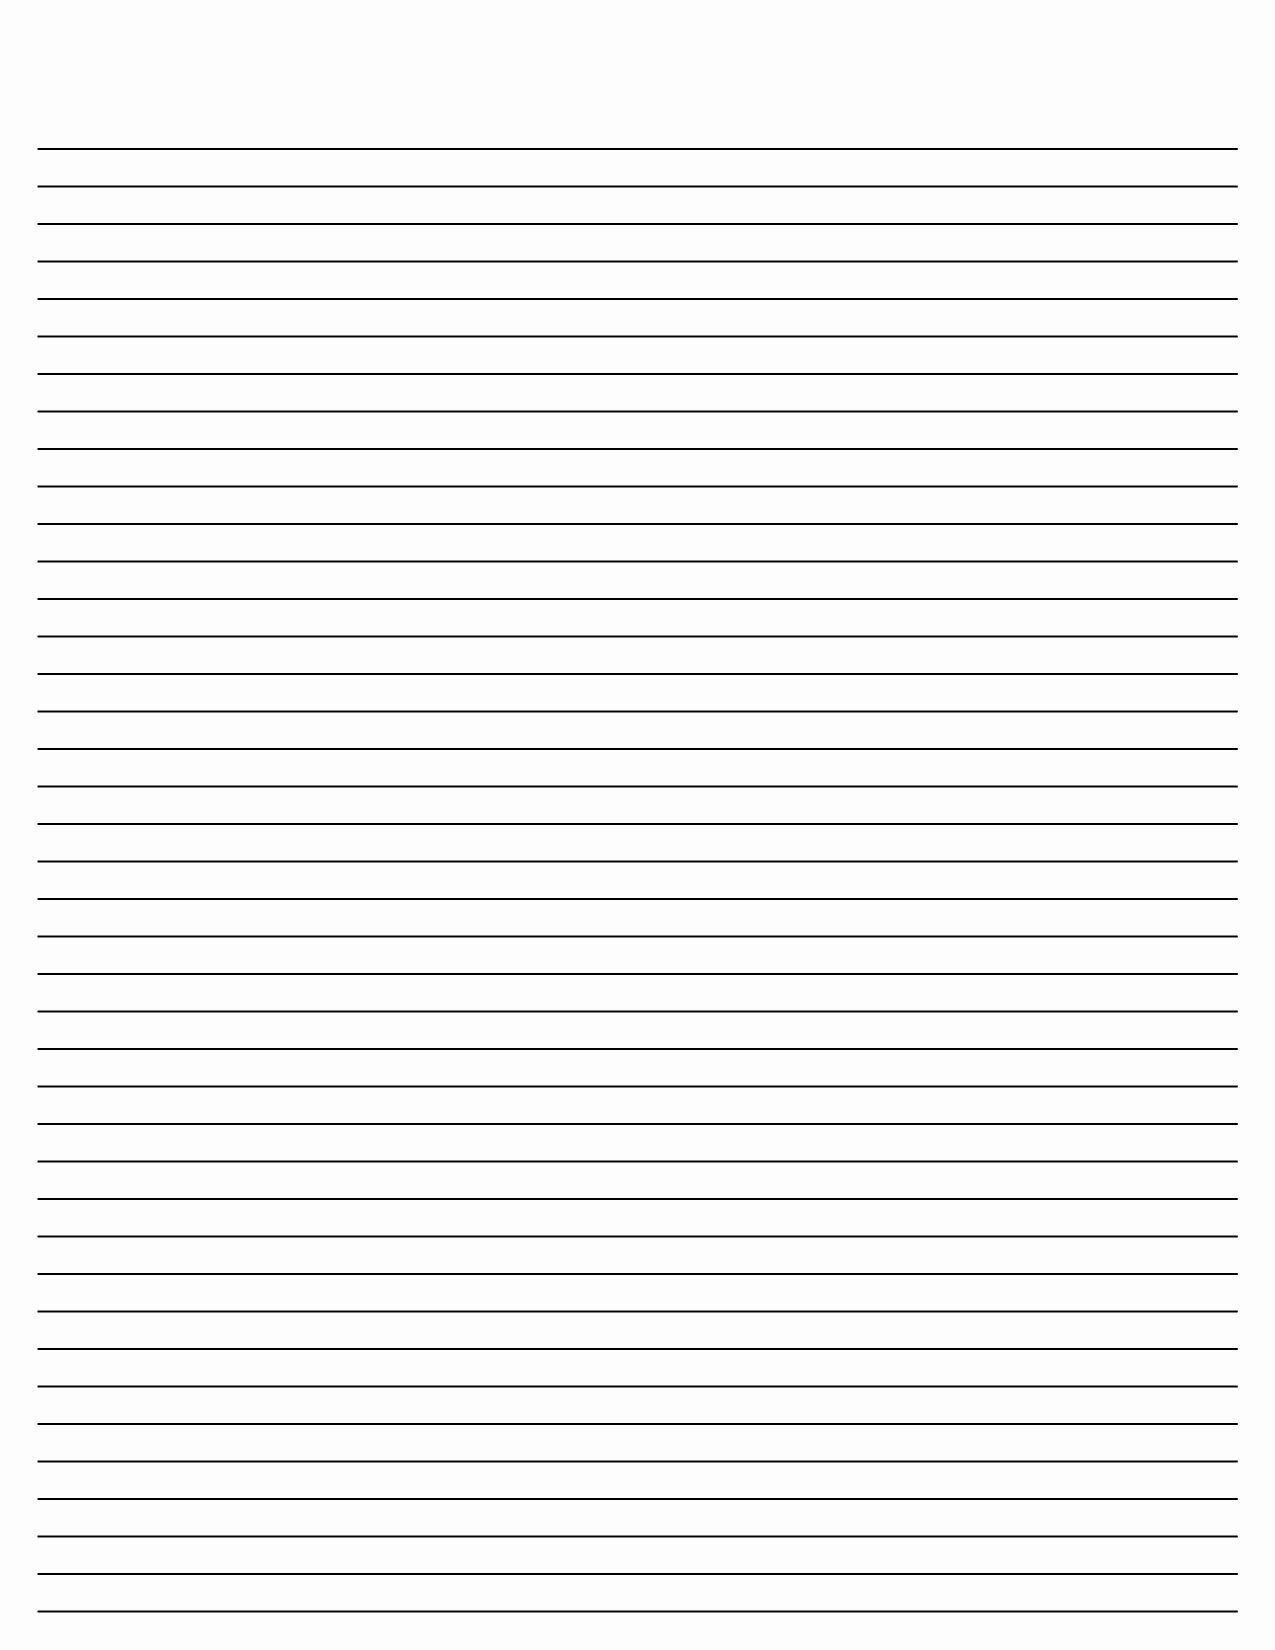 9 Best Of Printable Journal Paper with Lines Free